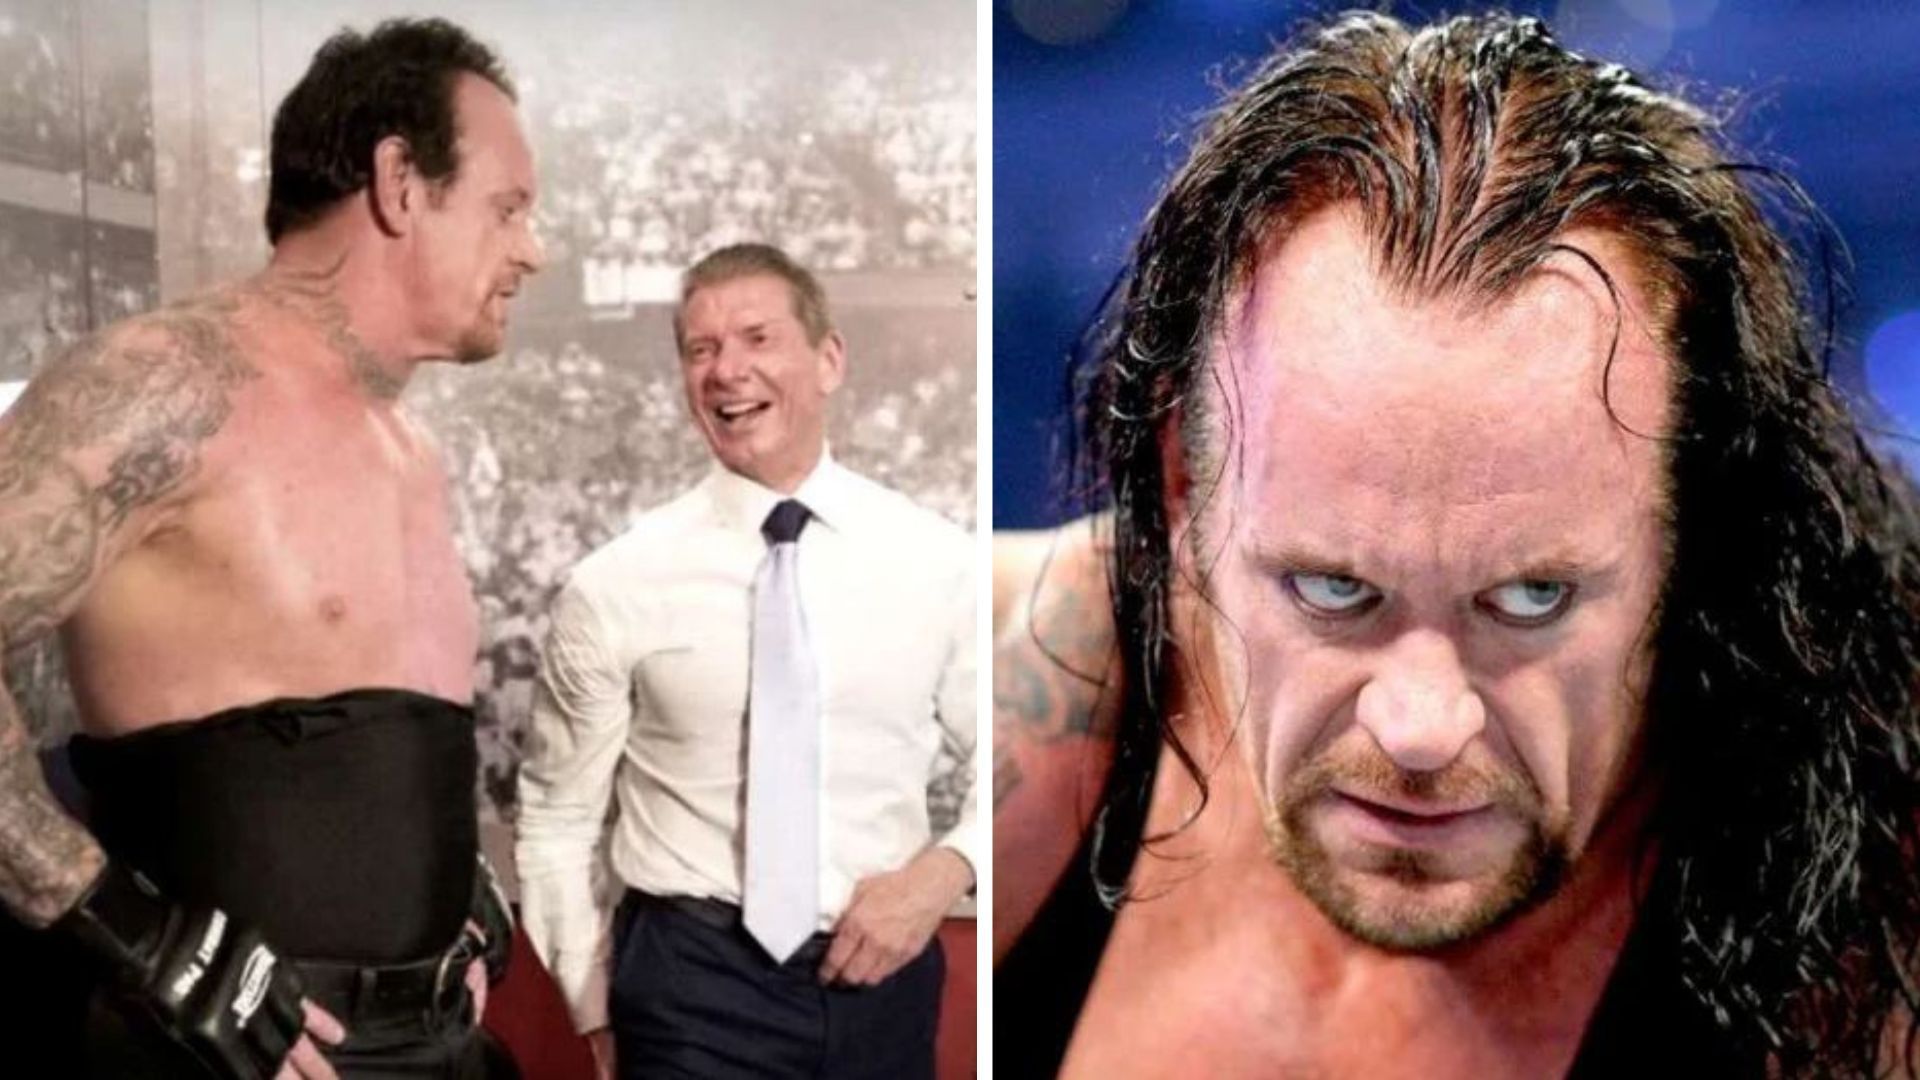 The Undertaker and Vince McMahon has a close relationship